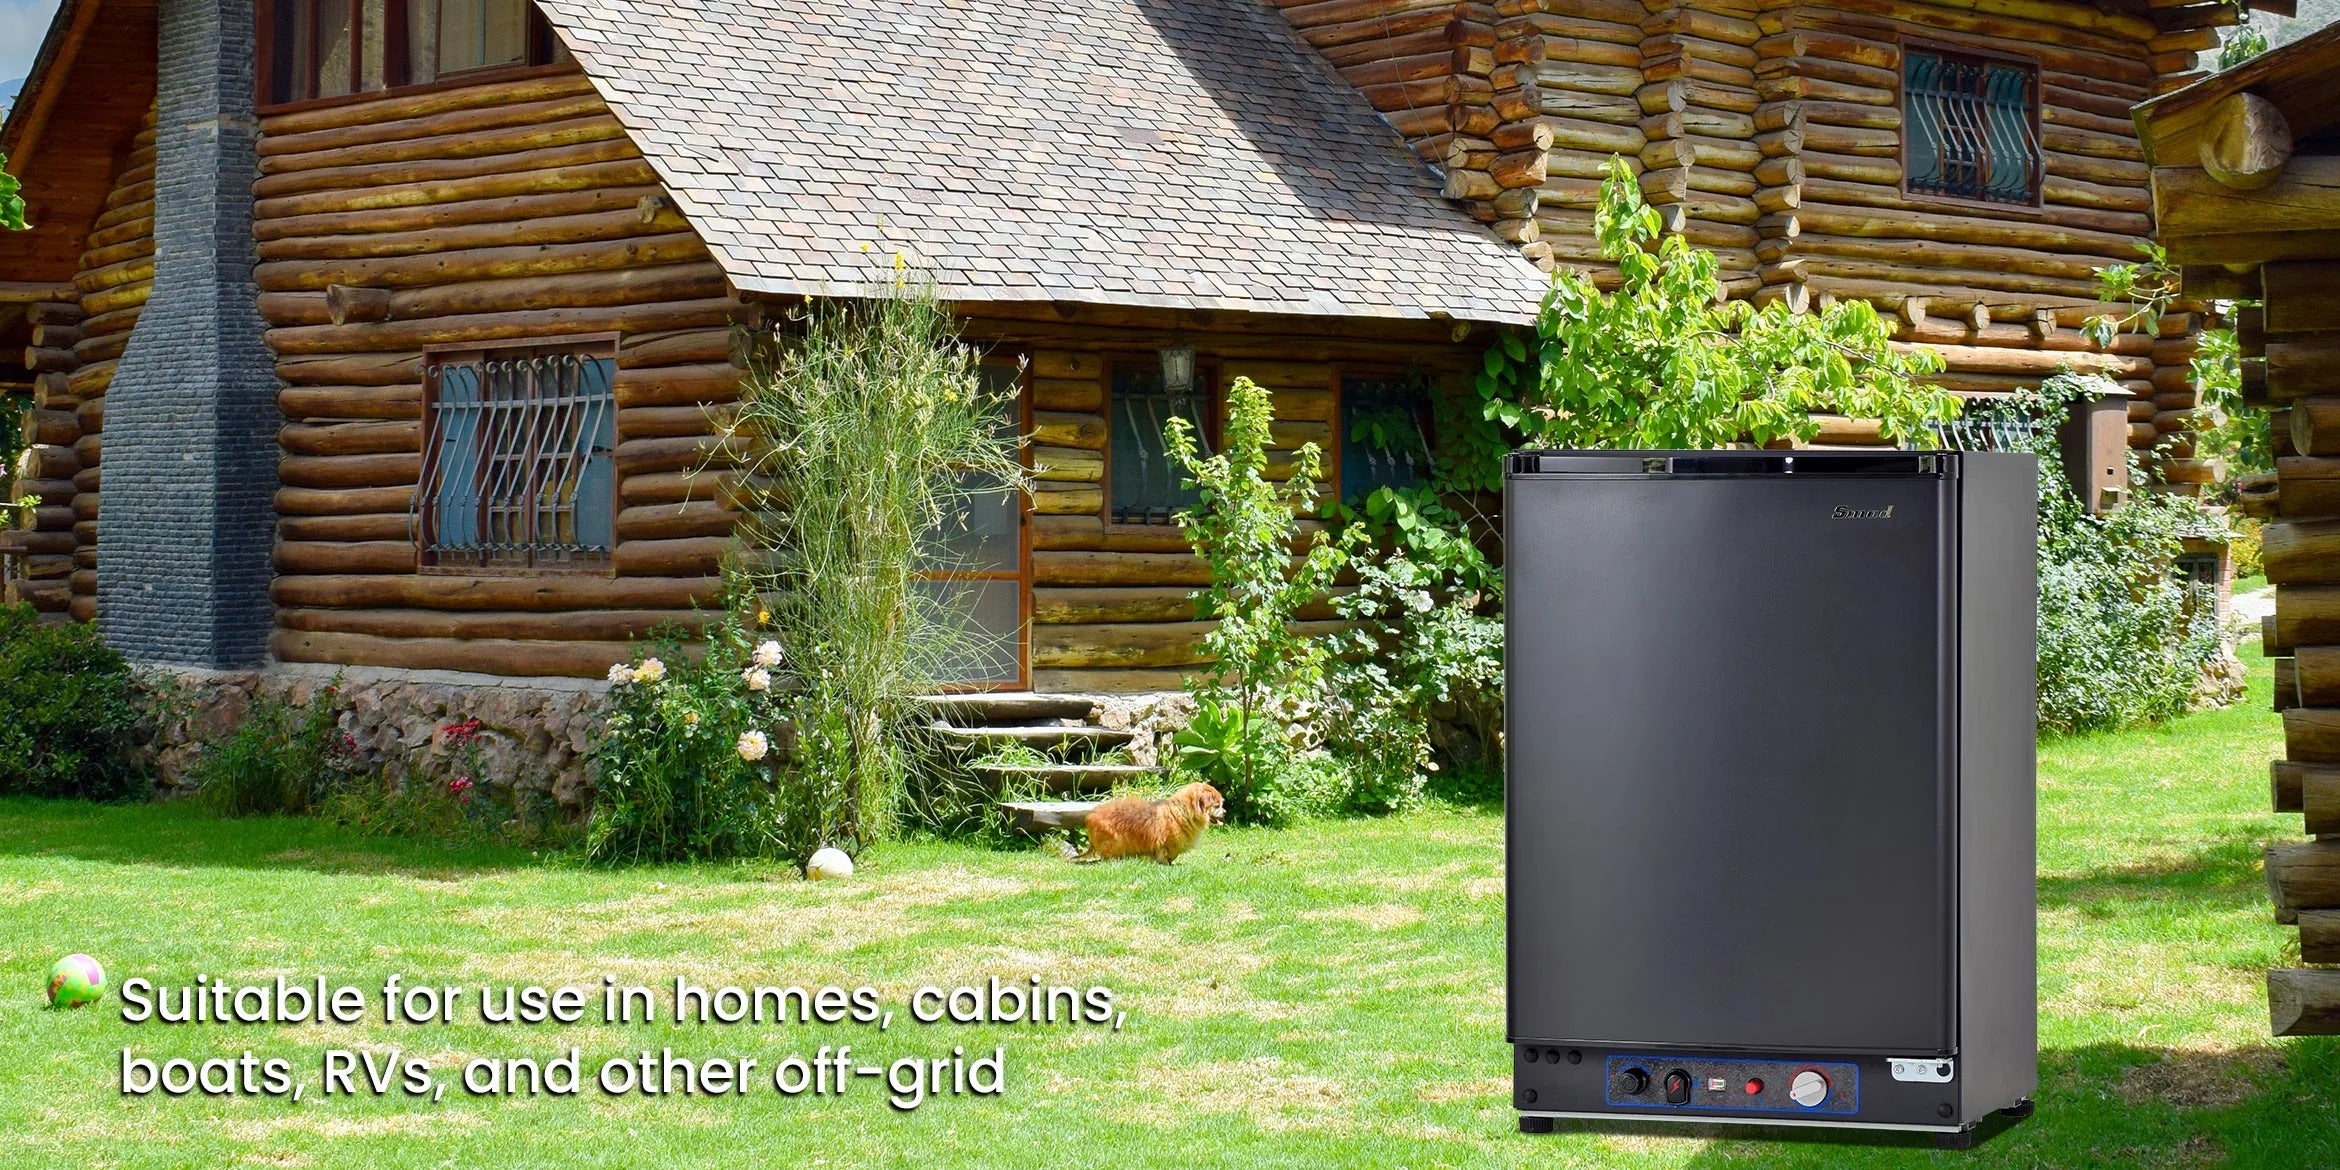 DSG-40L for homes, cabins, boats, RVs, and other off-grid situations in the UK